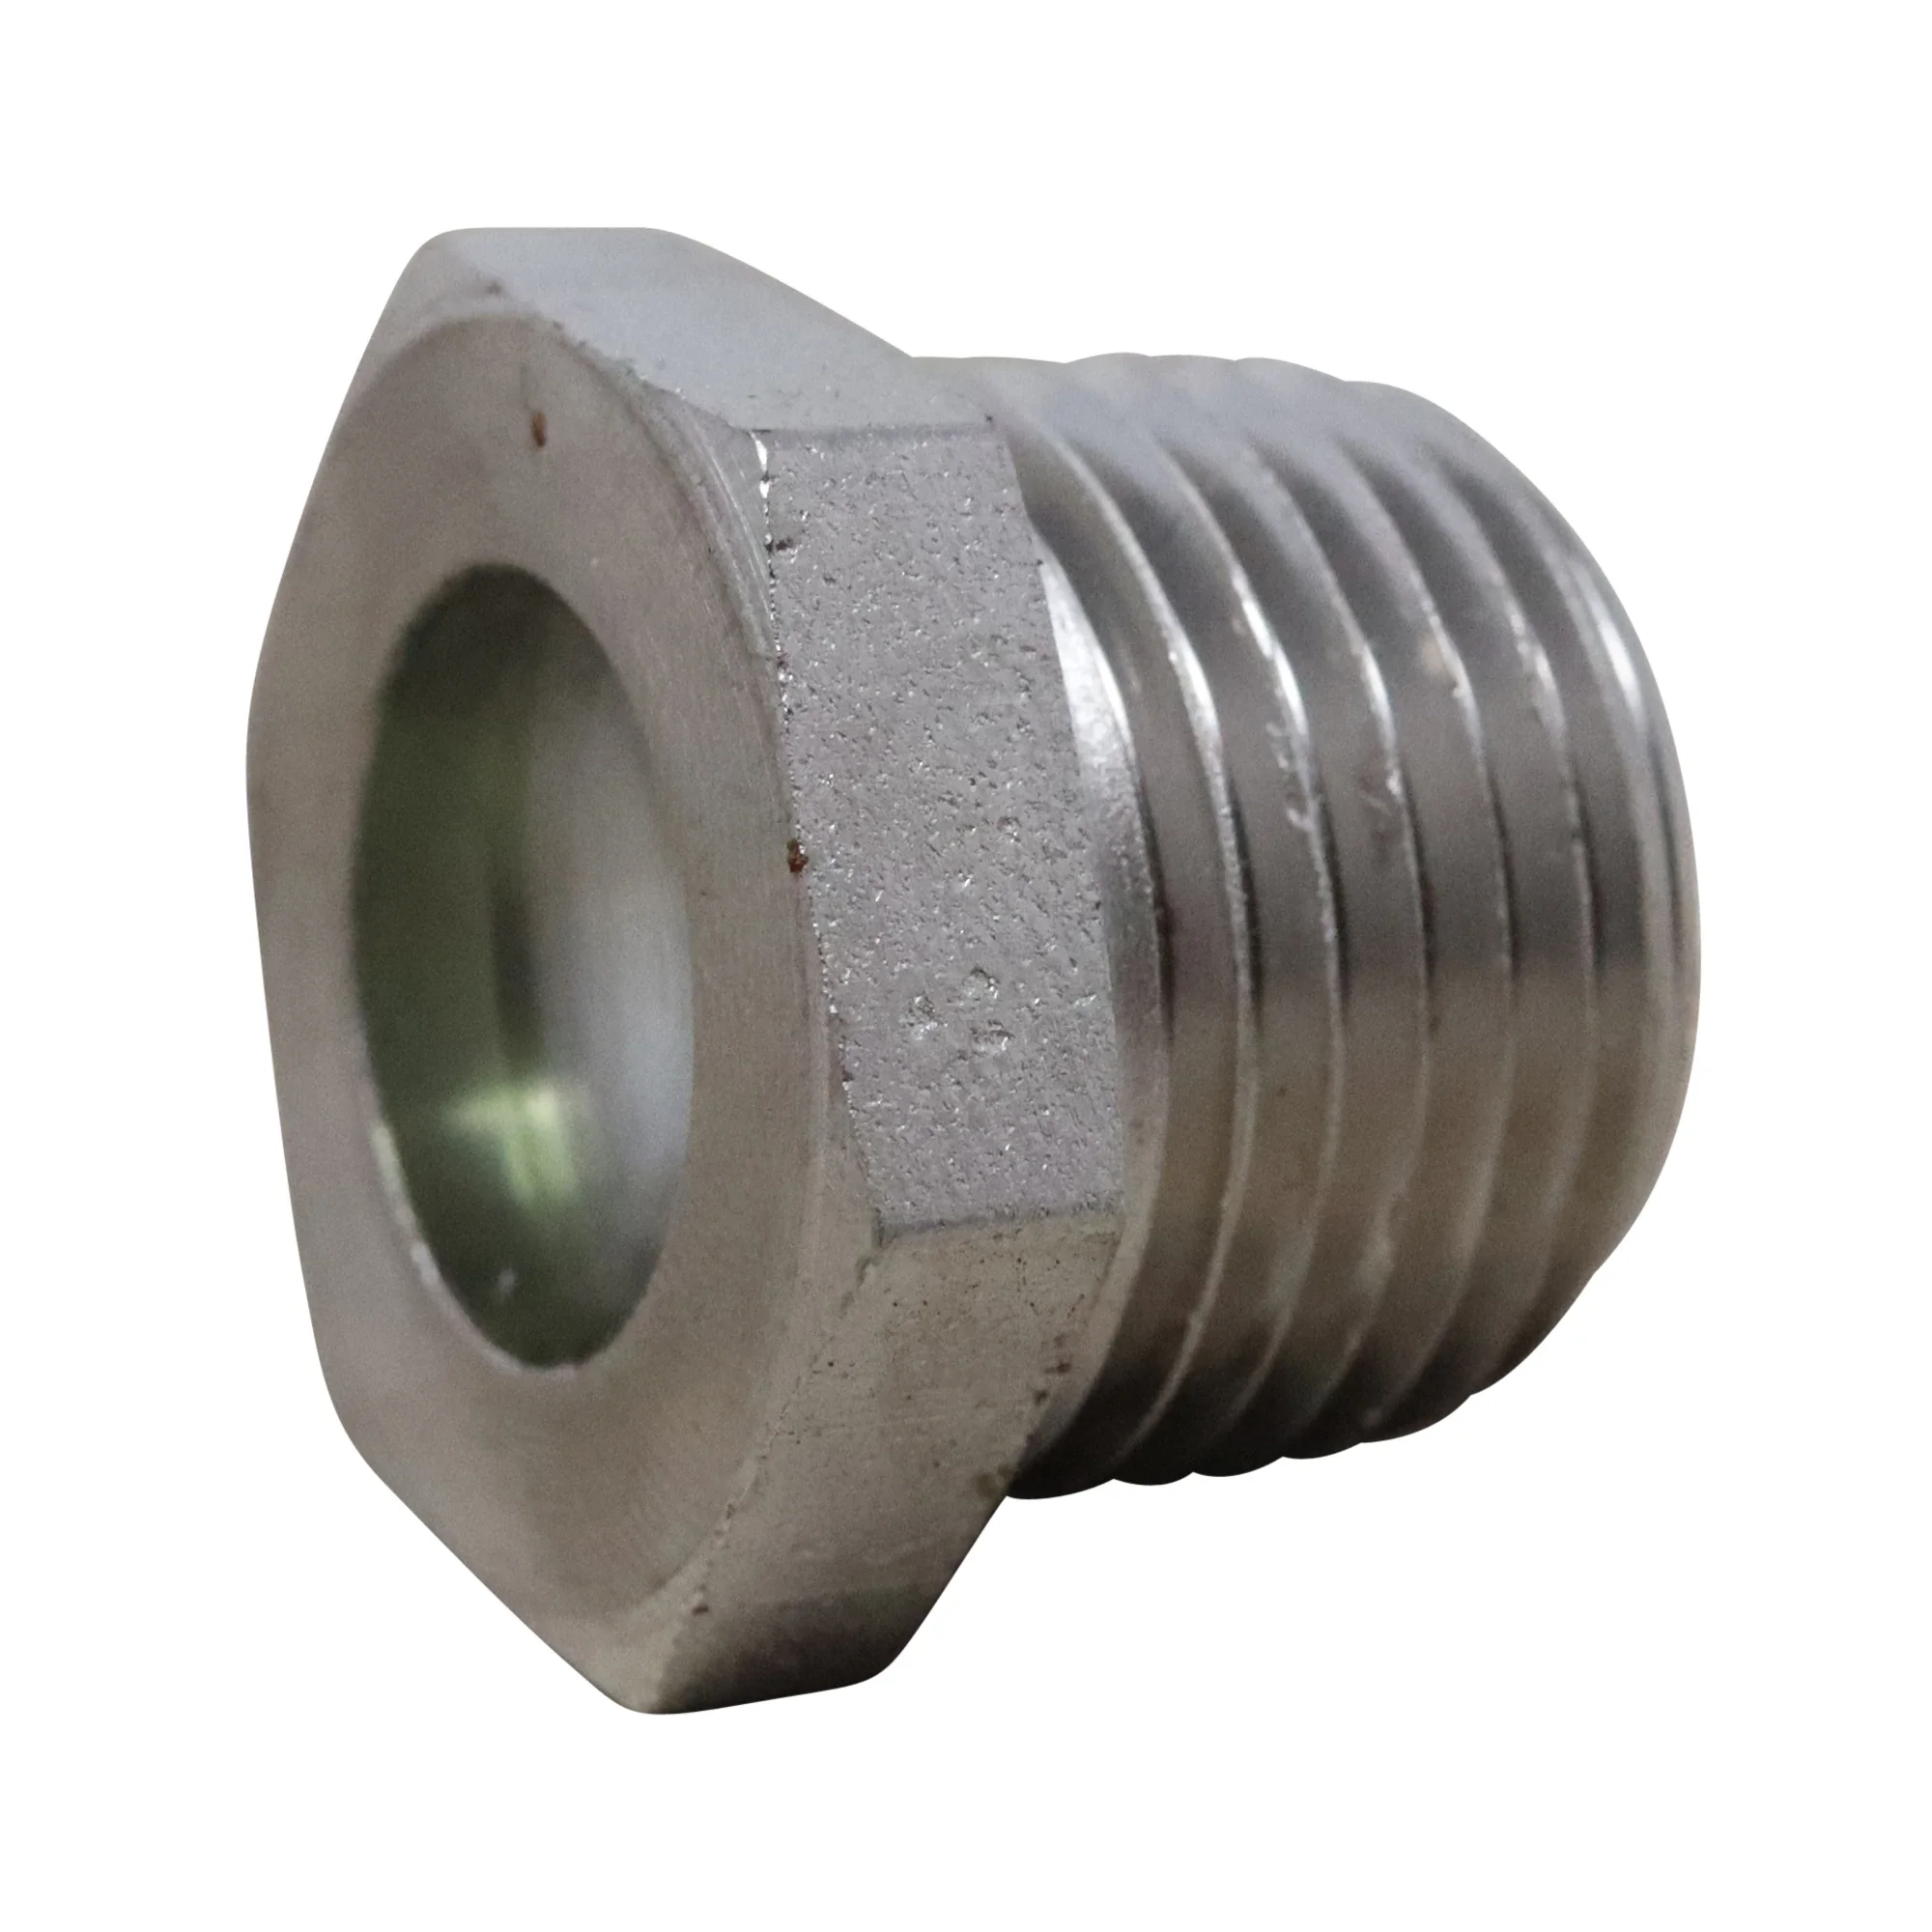 Wastebuilt® Replacement for 1/2" NPT Sight Glass/Gauge